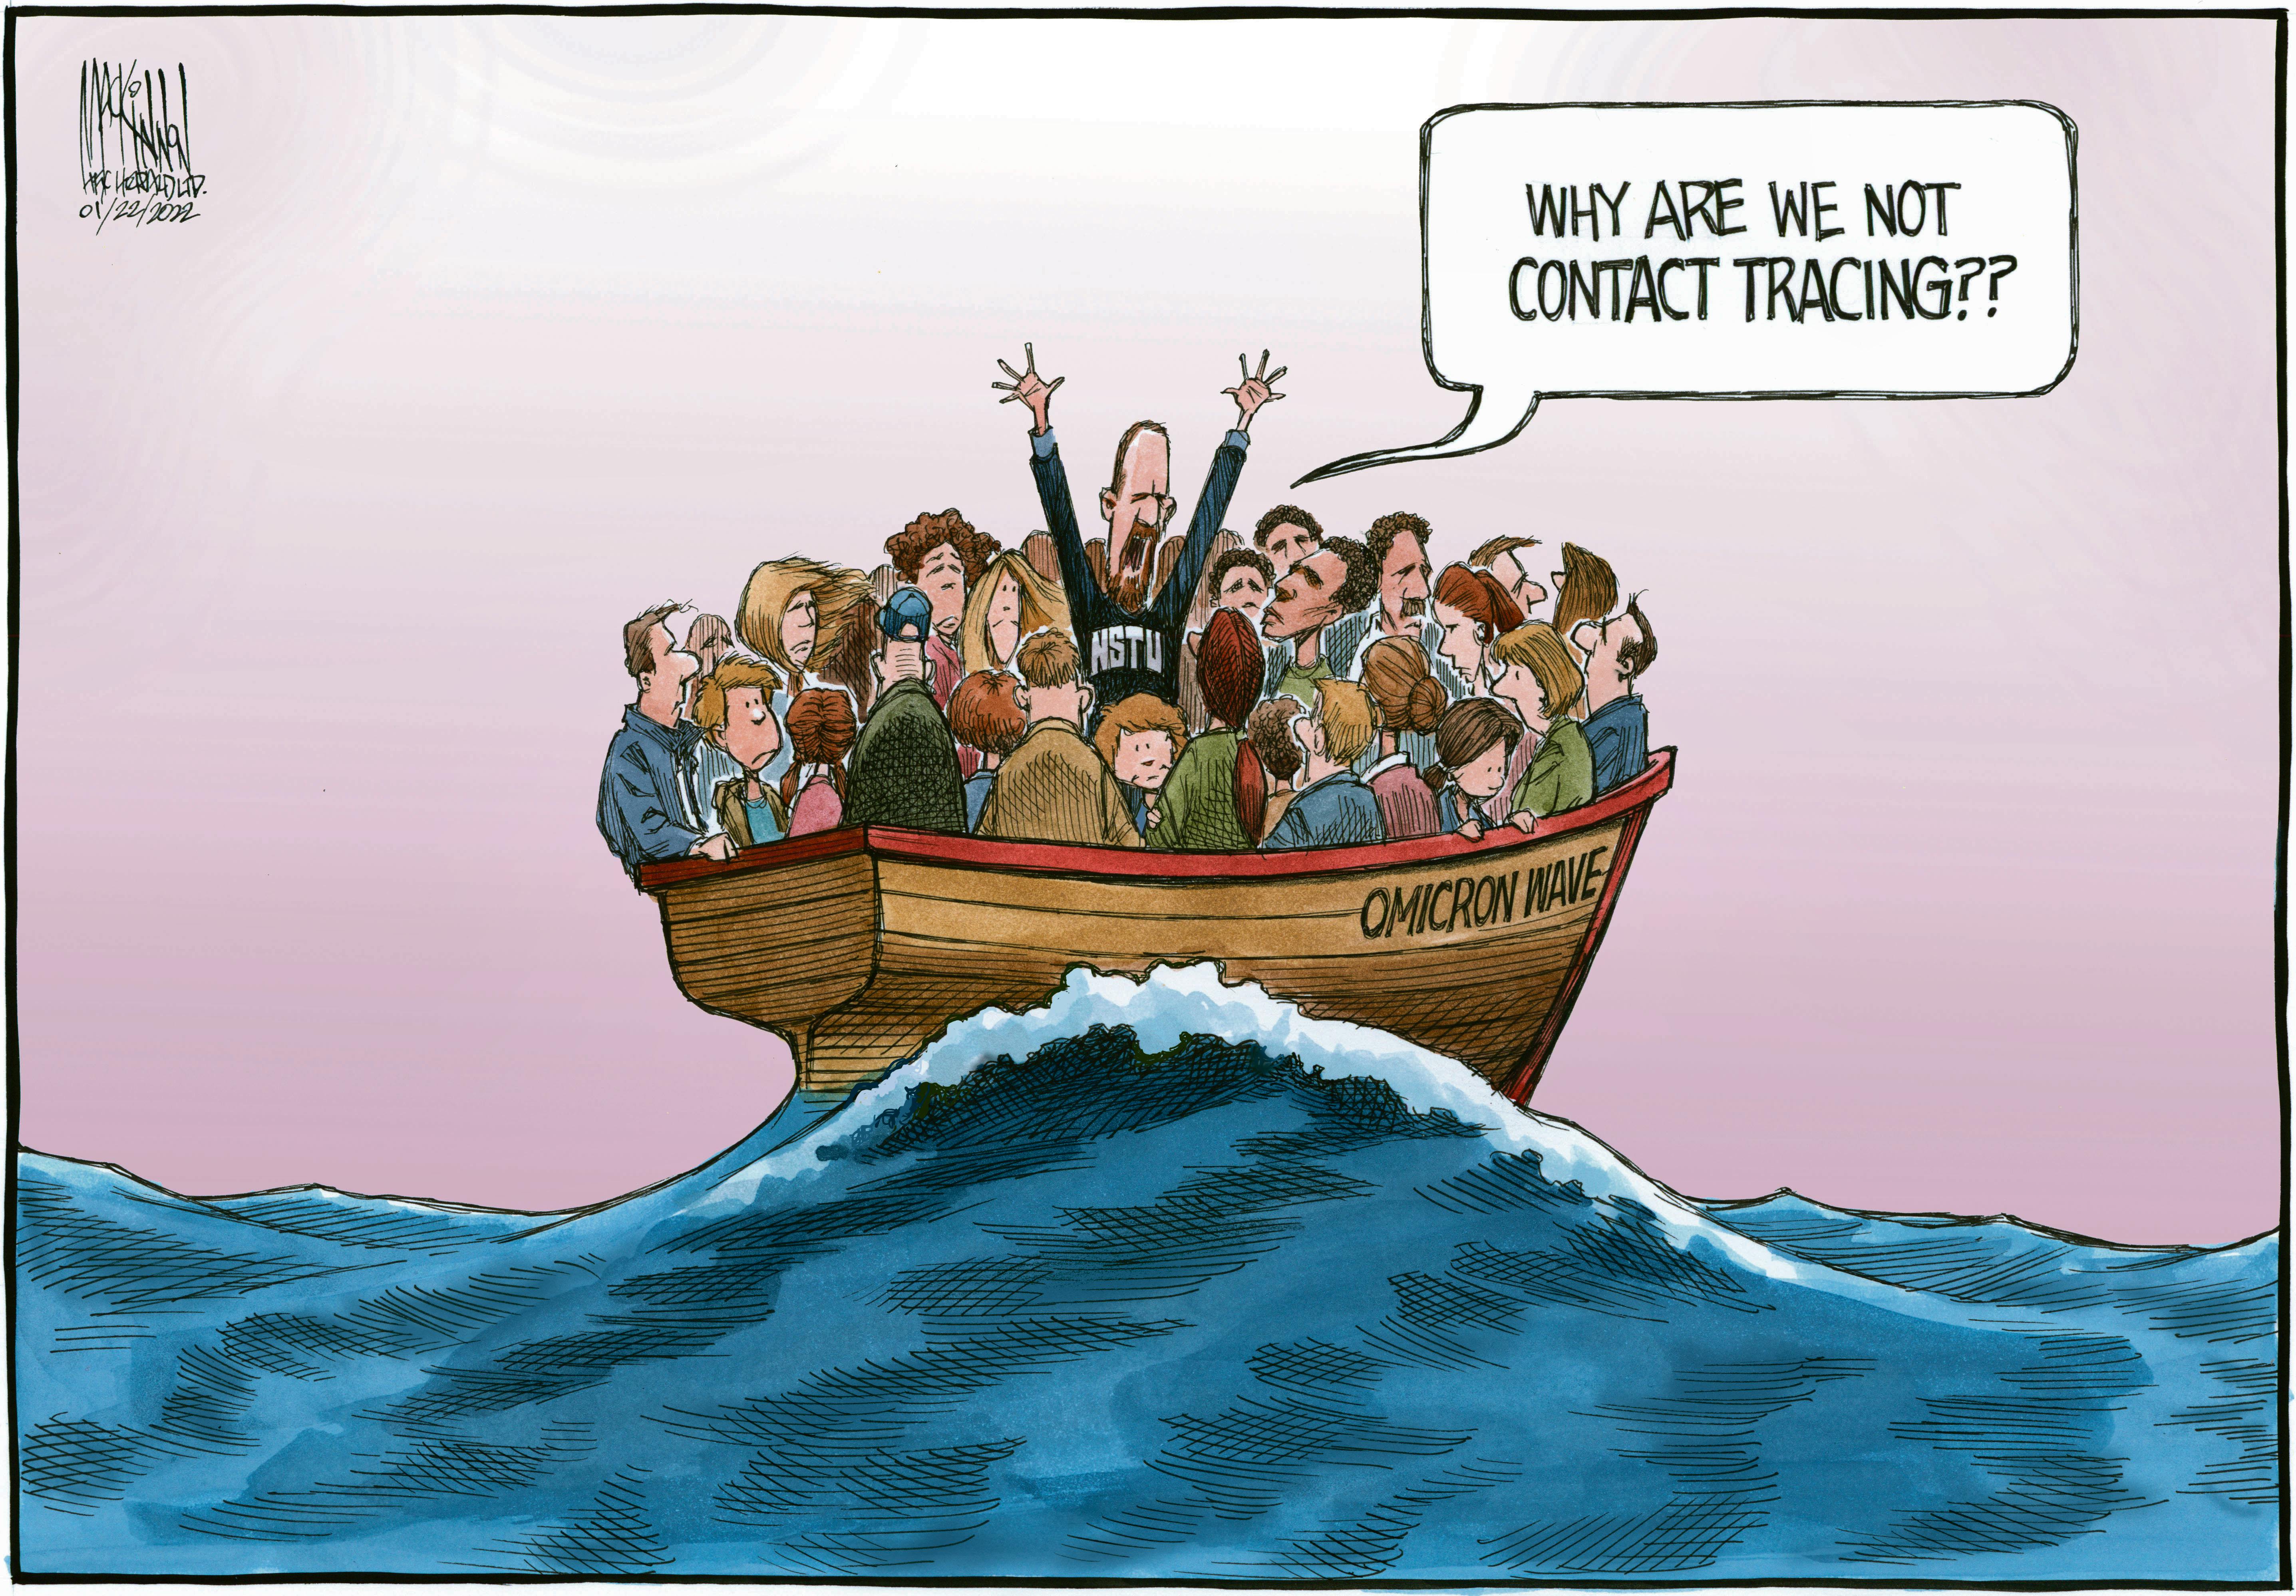 NSTU PAUL contact tracing on crowded packed boat Bruce MacKinnon January 22, 2022